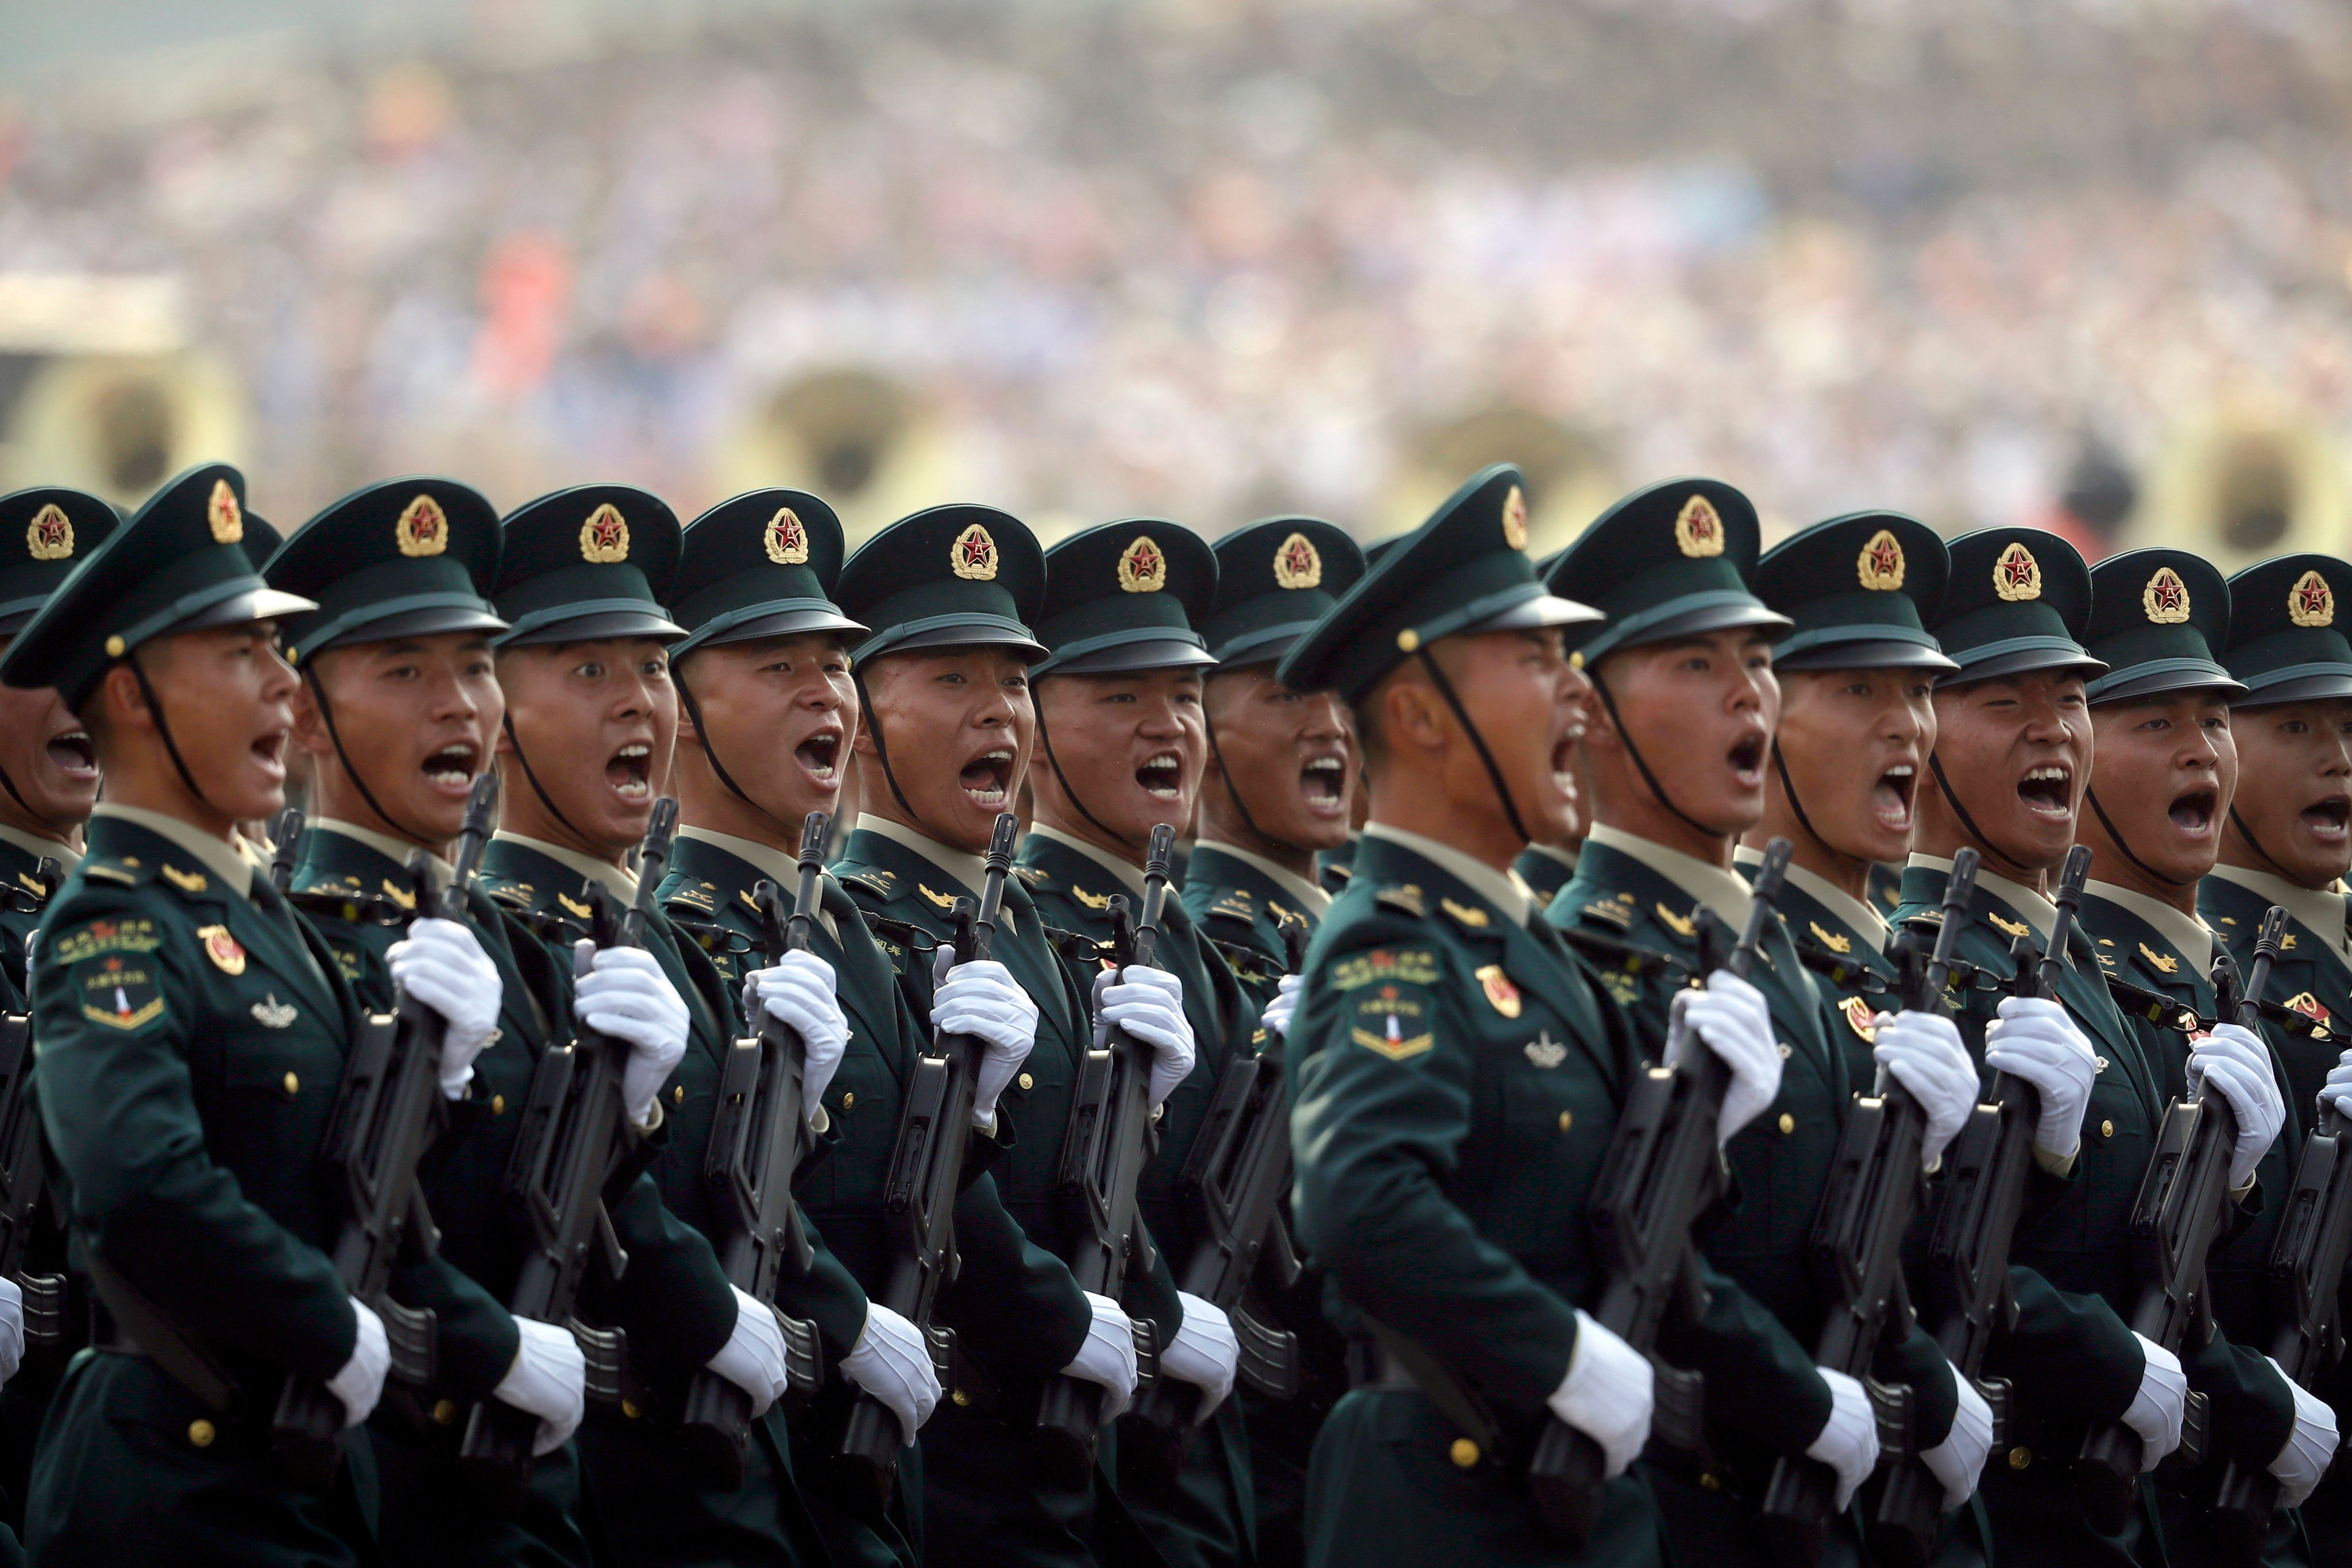 Members of the People’s Liberation Army Rocket Force march during the parade commemorating the 70th anniversary of the founding of the People’s Republic of China in Beijing in October 2019. Photo: AP